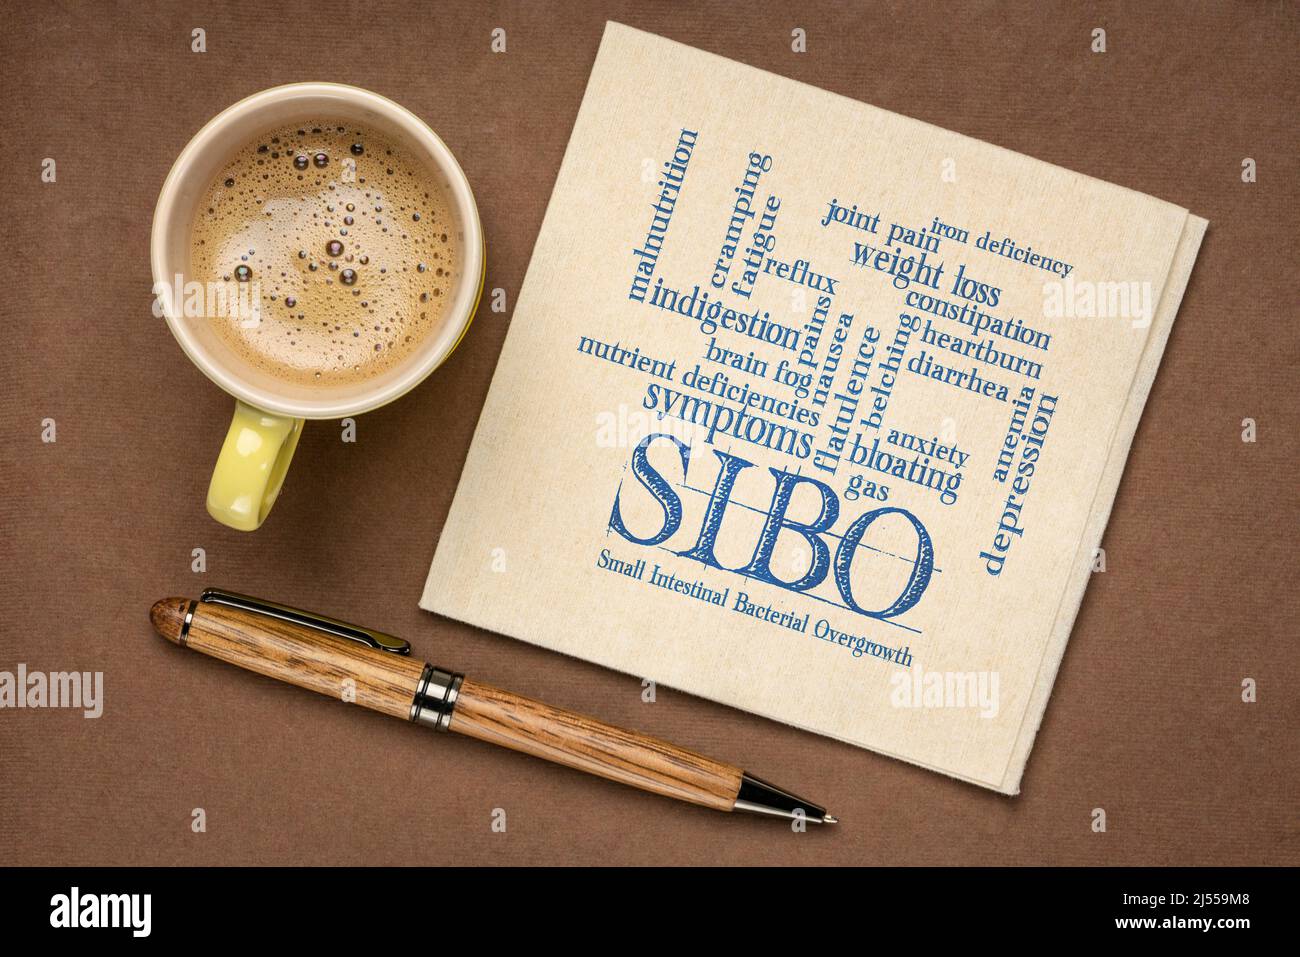 Is Coffee Bad for Sibo? 